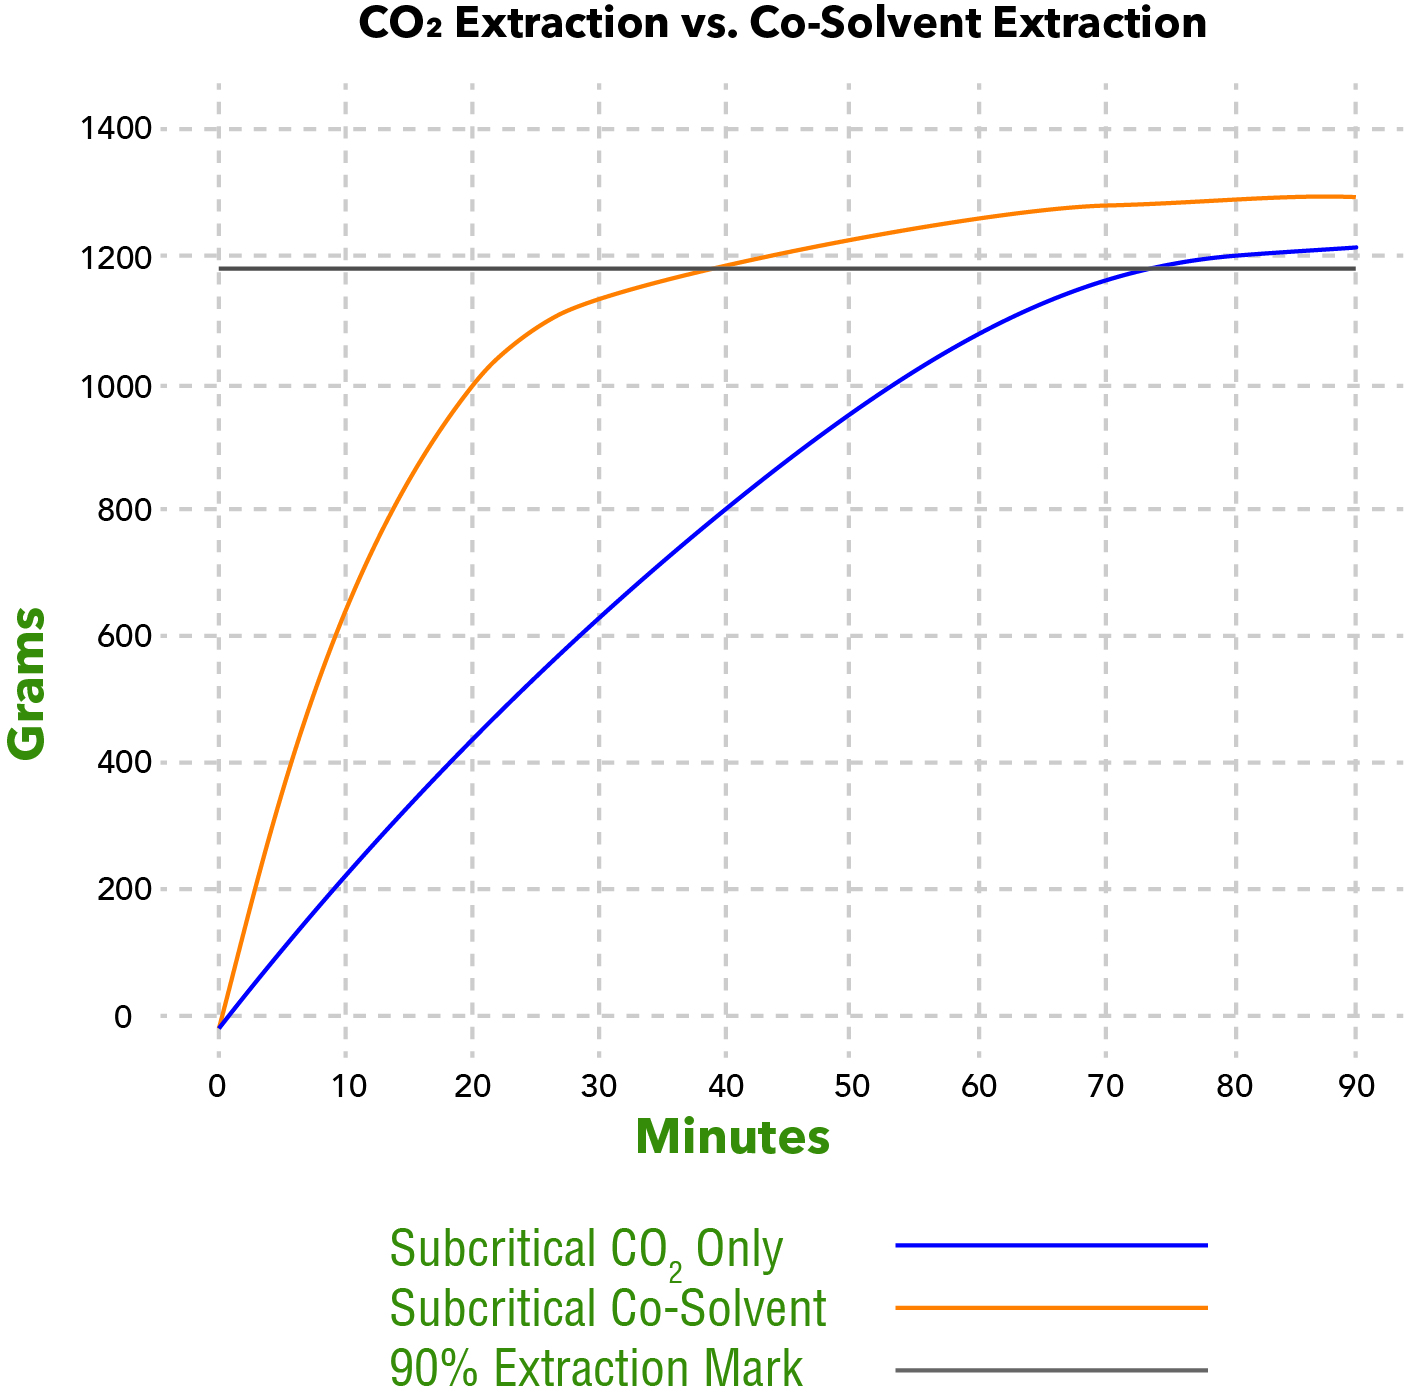 https://campaign-image.com/zohocampaigns/122231000015014368_zc_v88_co2_only_vs_co_solvent.jpg